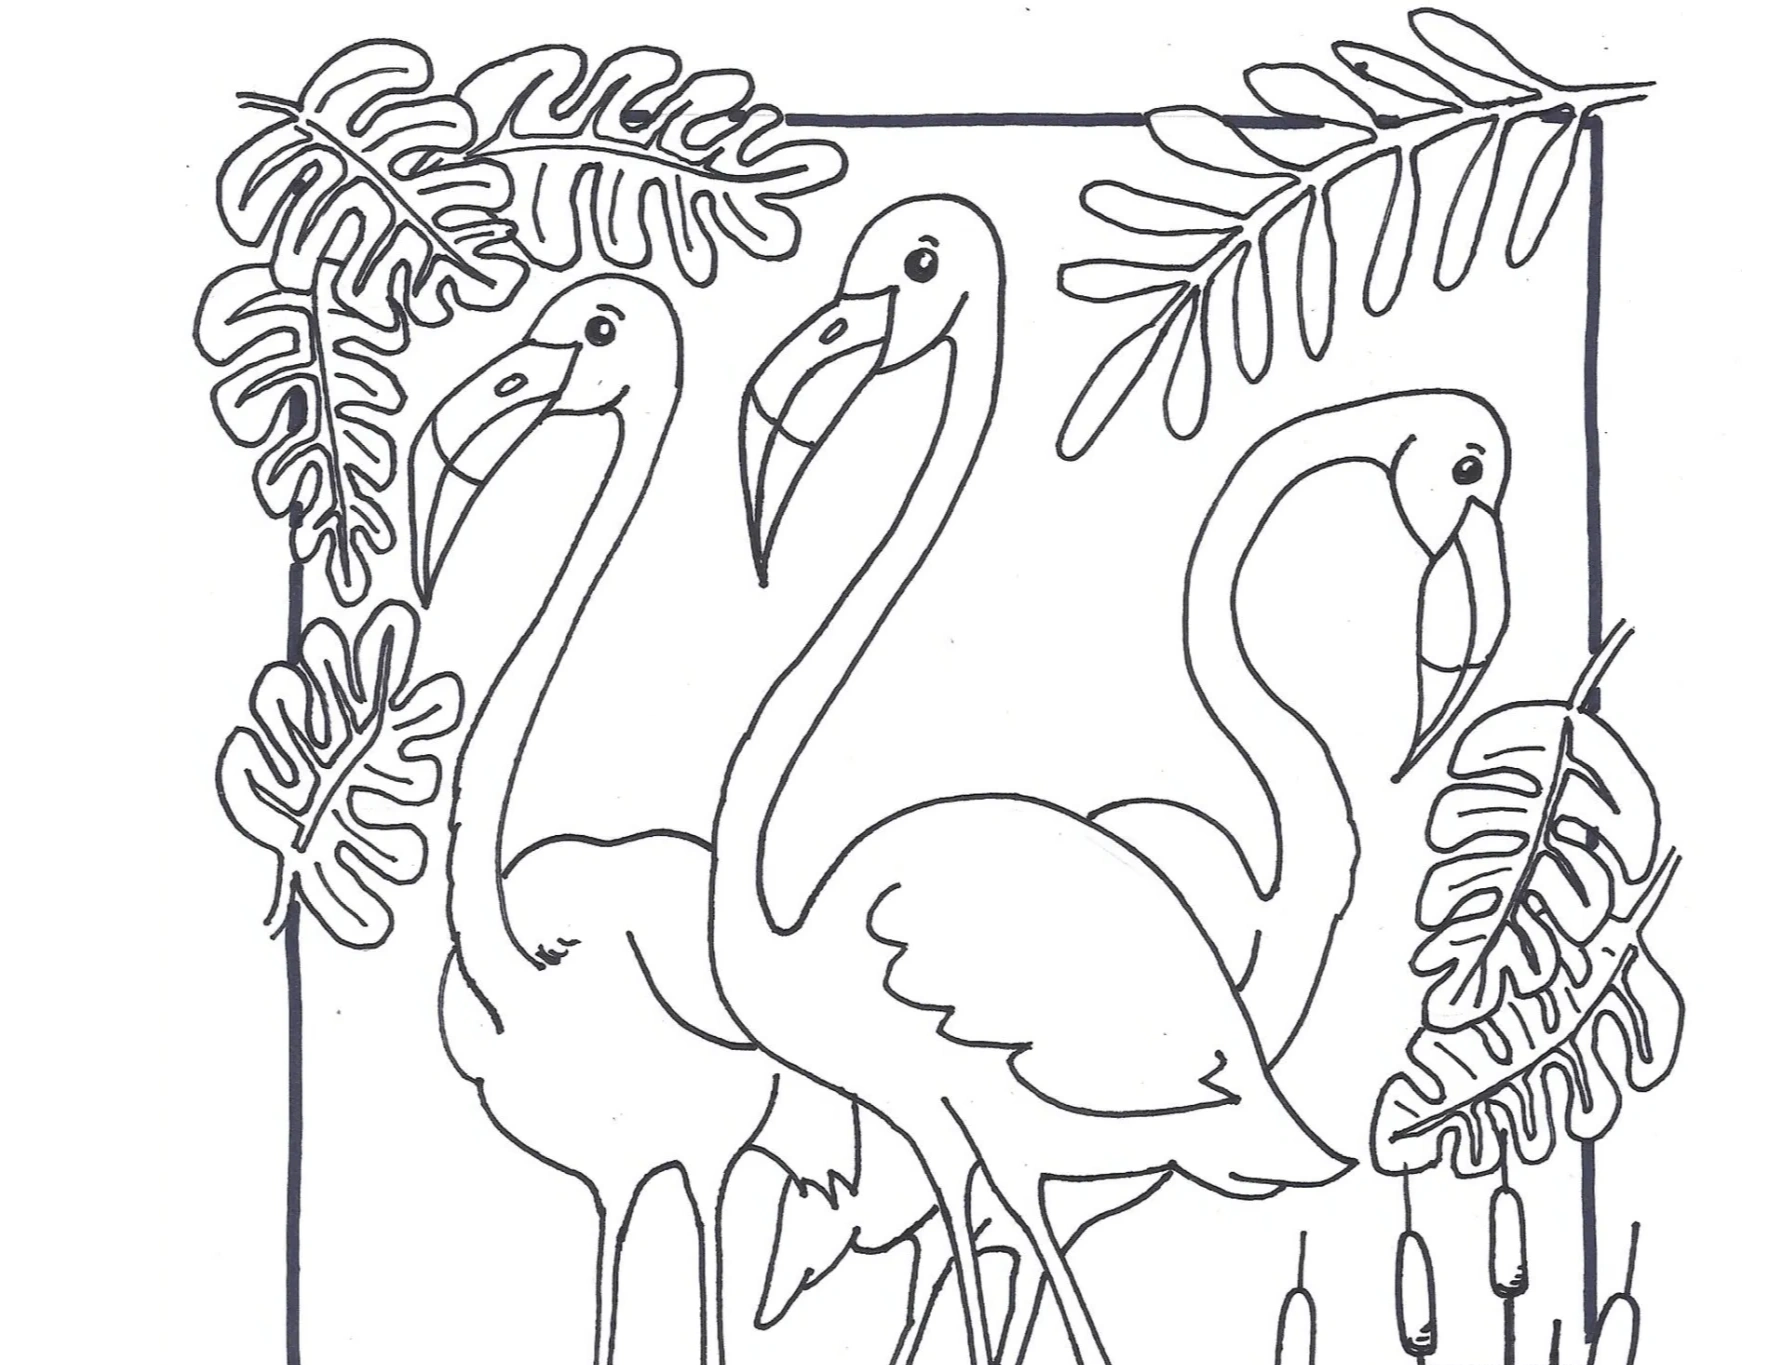 Color the flamingoes